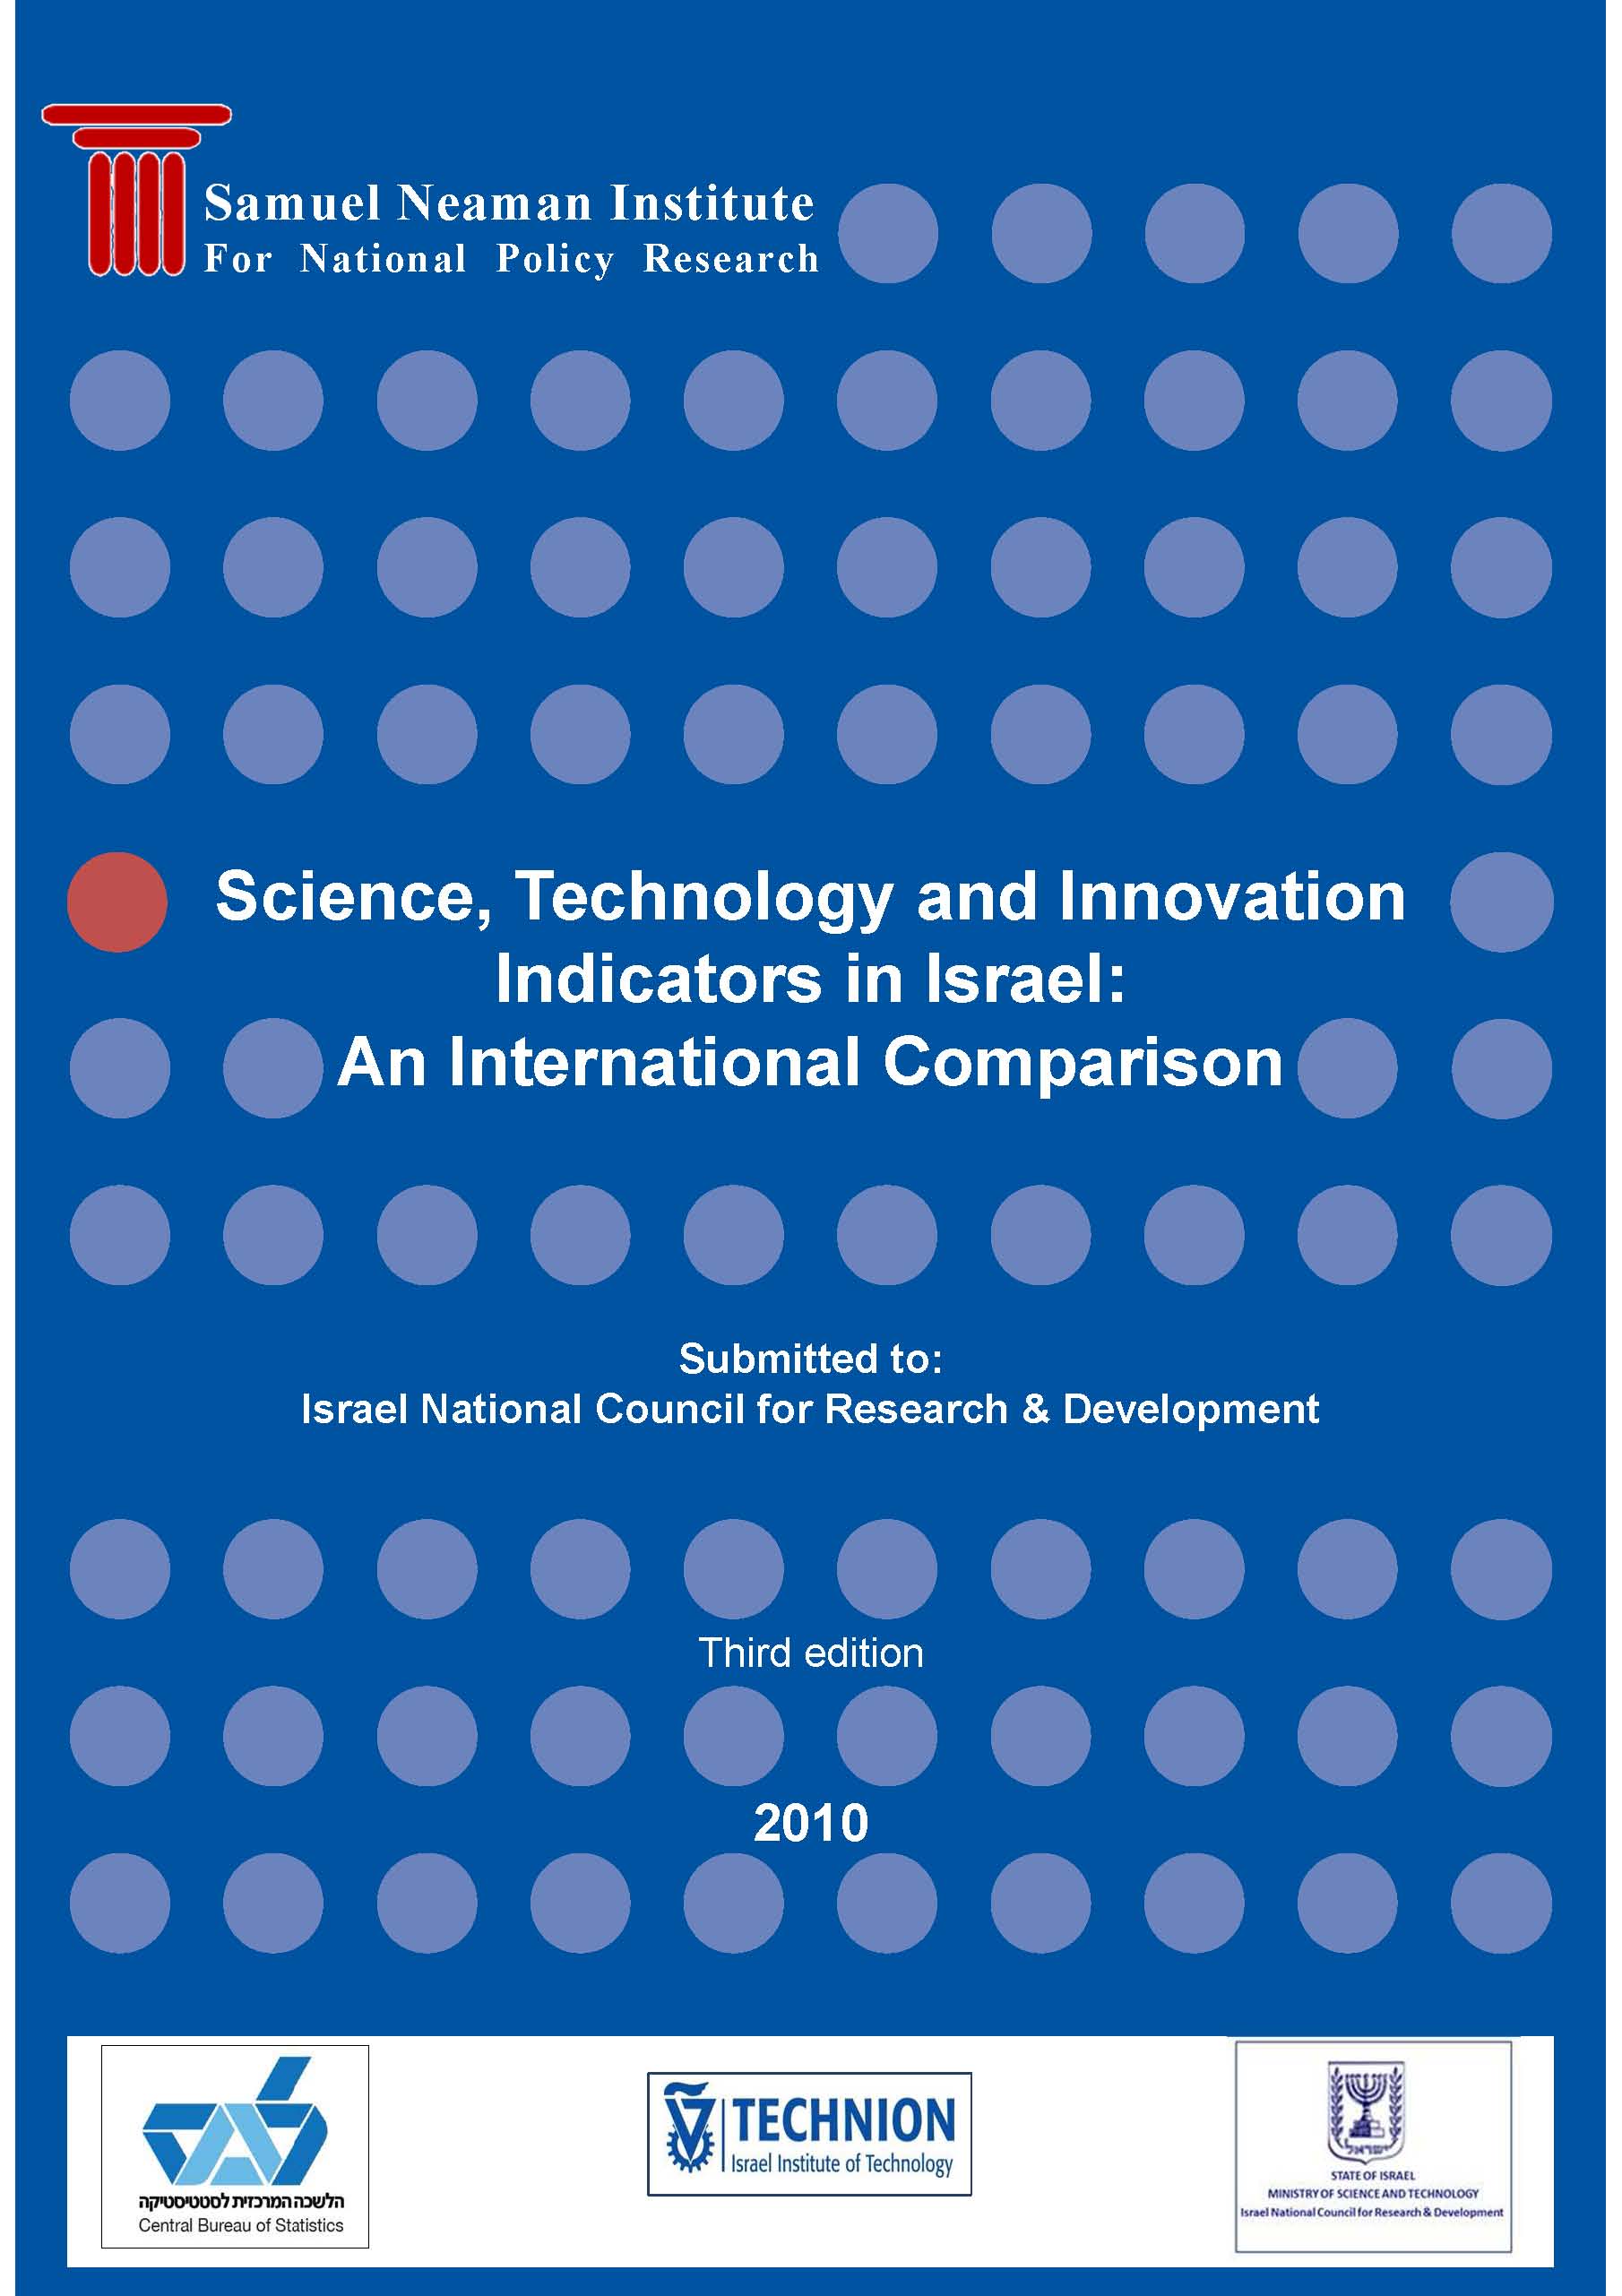 Science , Technology and Innovation Indicators in Israel: An International Comparison (Third edition) English version